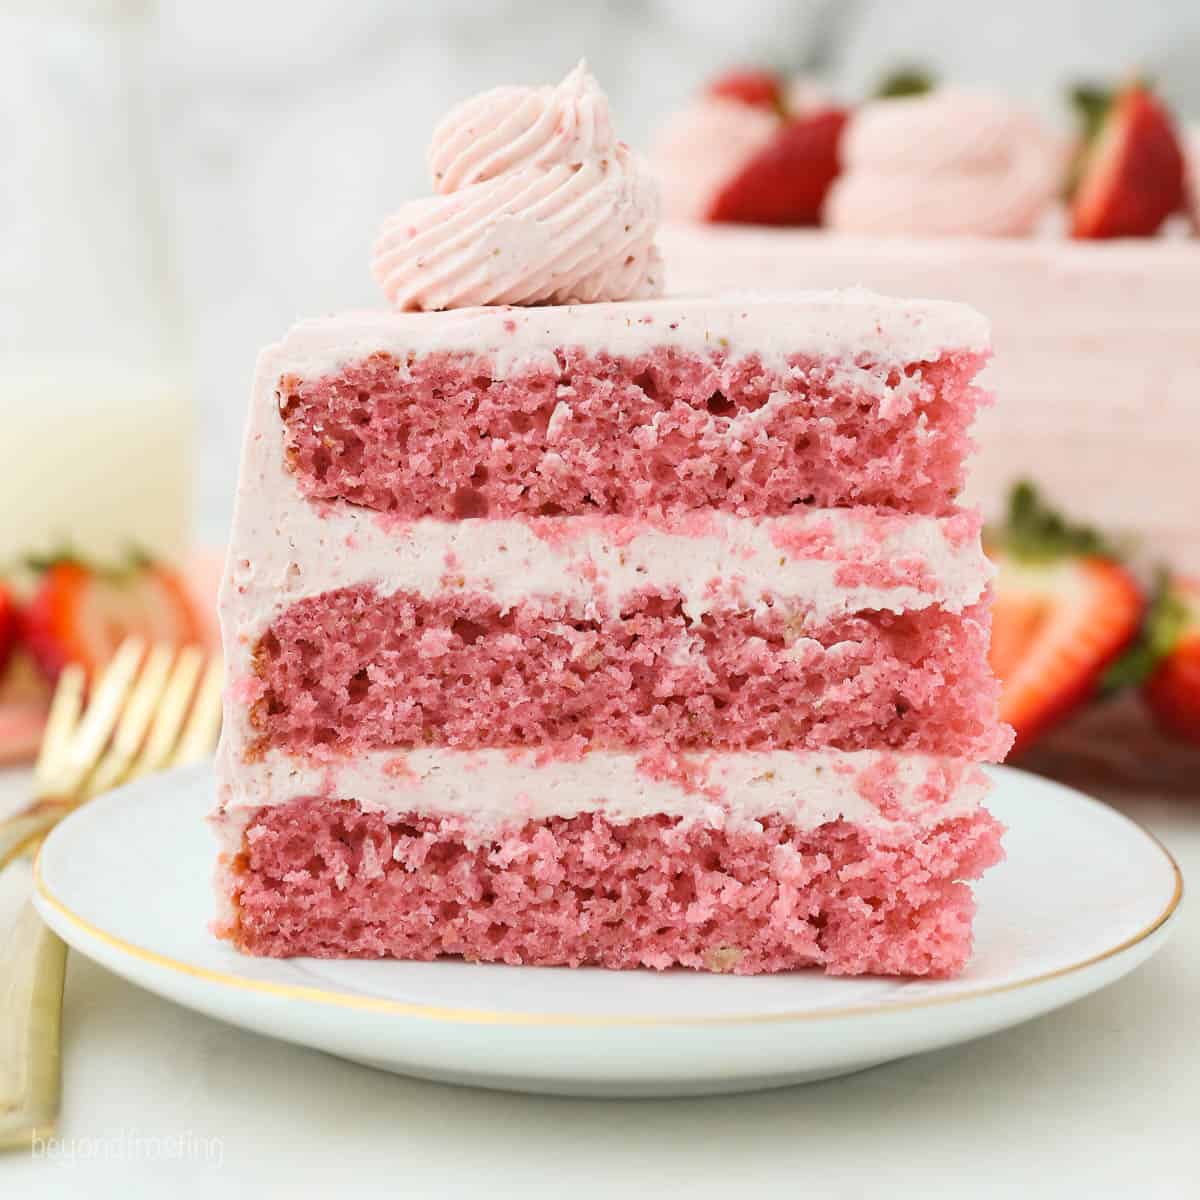 Strawberry Cake - Grandmother's Favorite, with real strawberries inside!